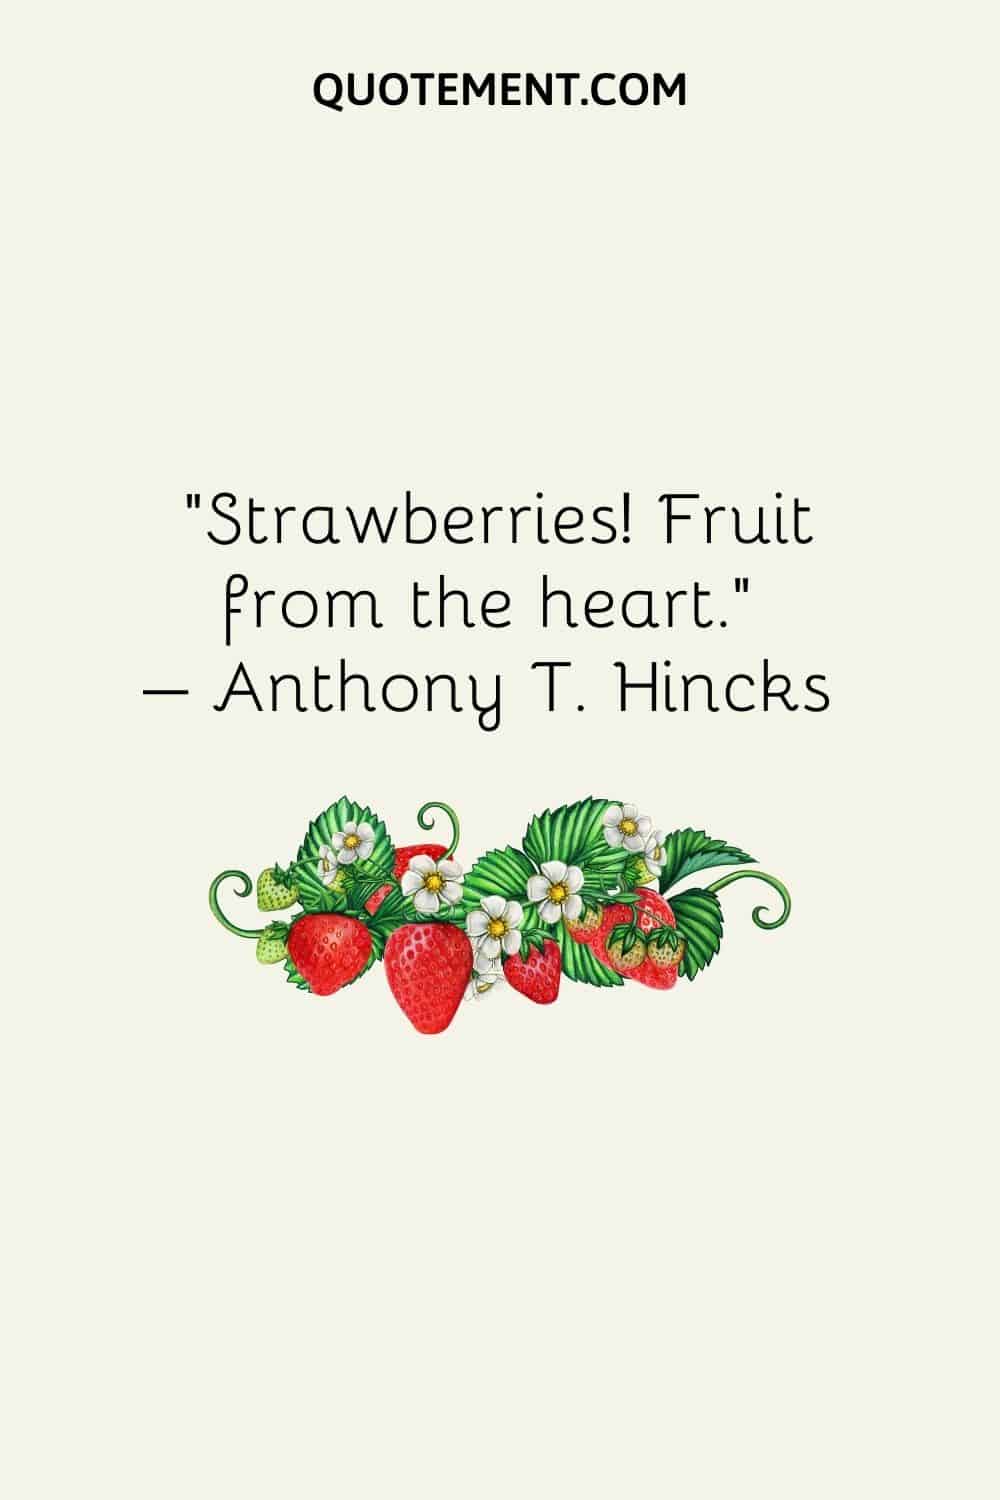 Strawberries! Fruit from the heart